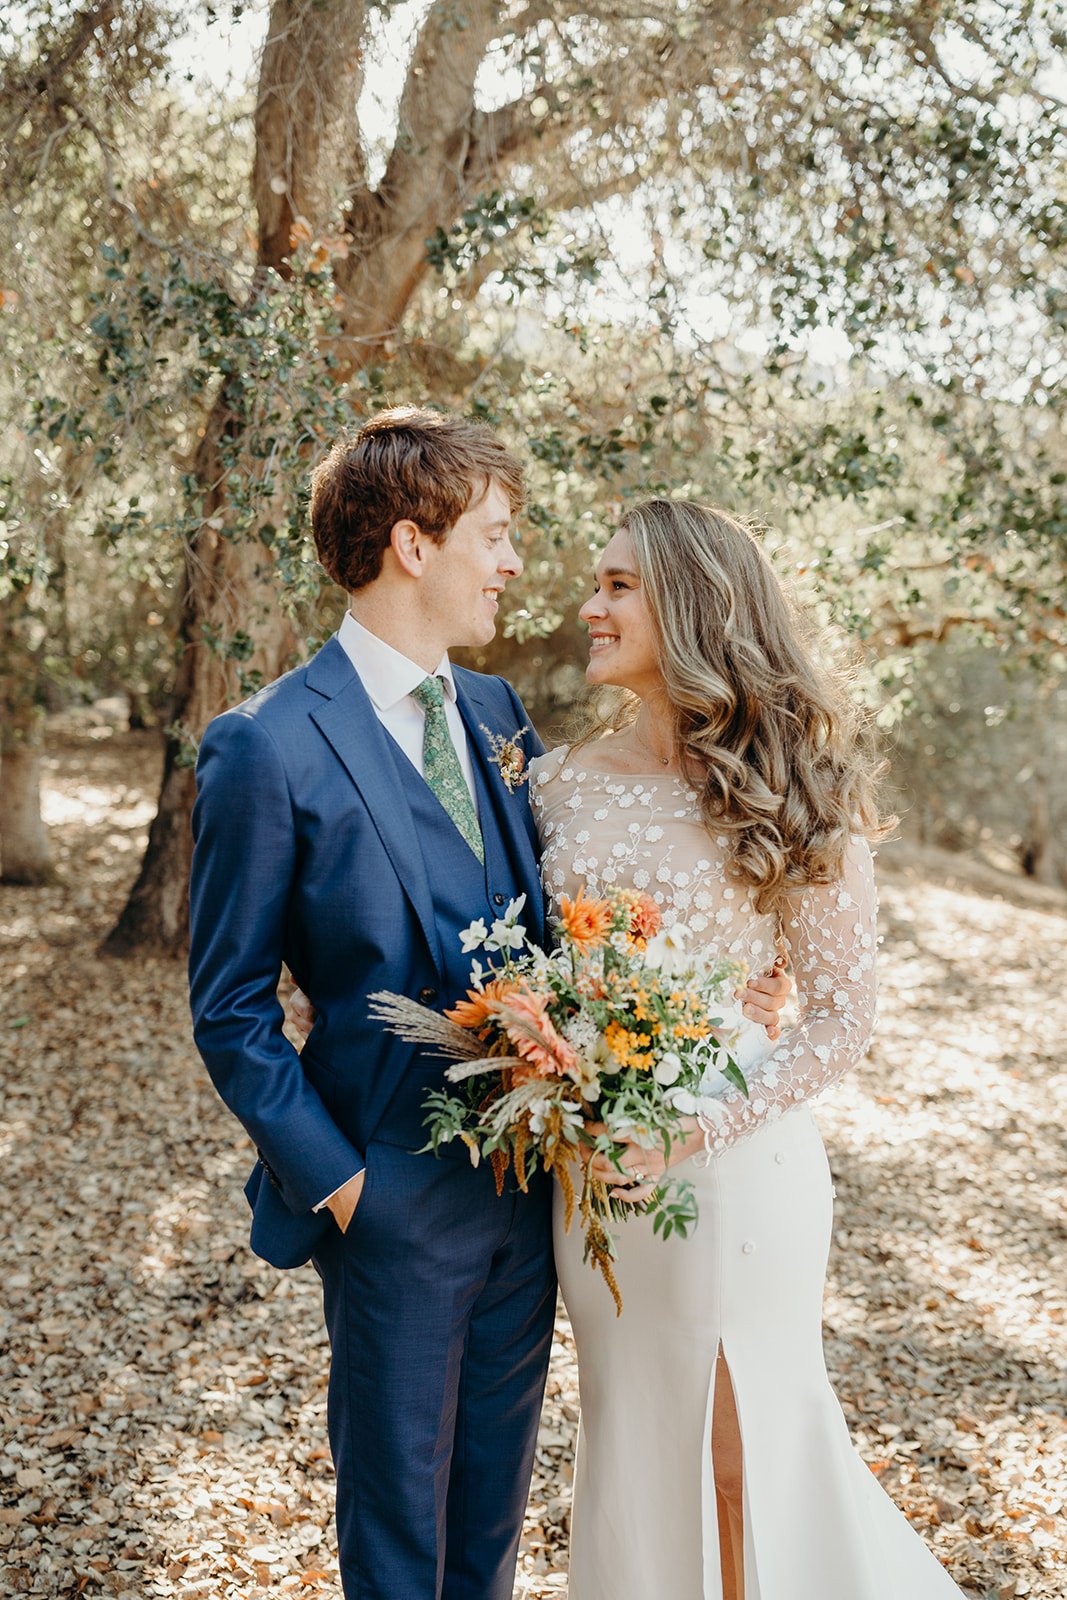 Terra Cotta and Sage Wedding at The Camp at Carmel Valley